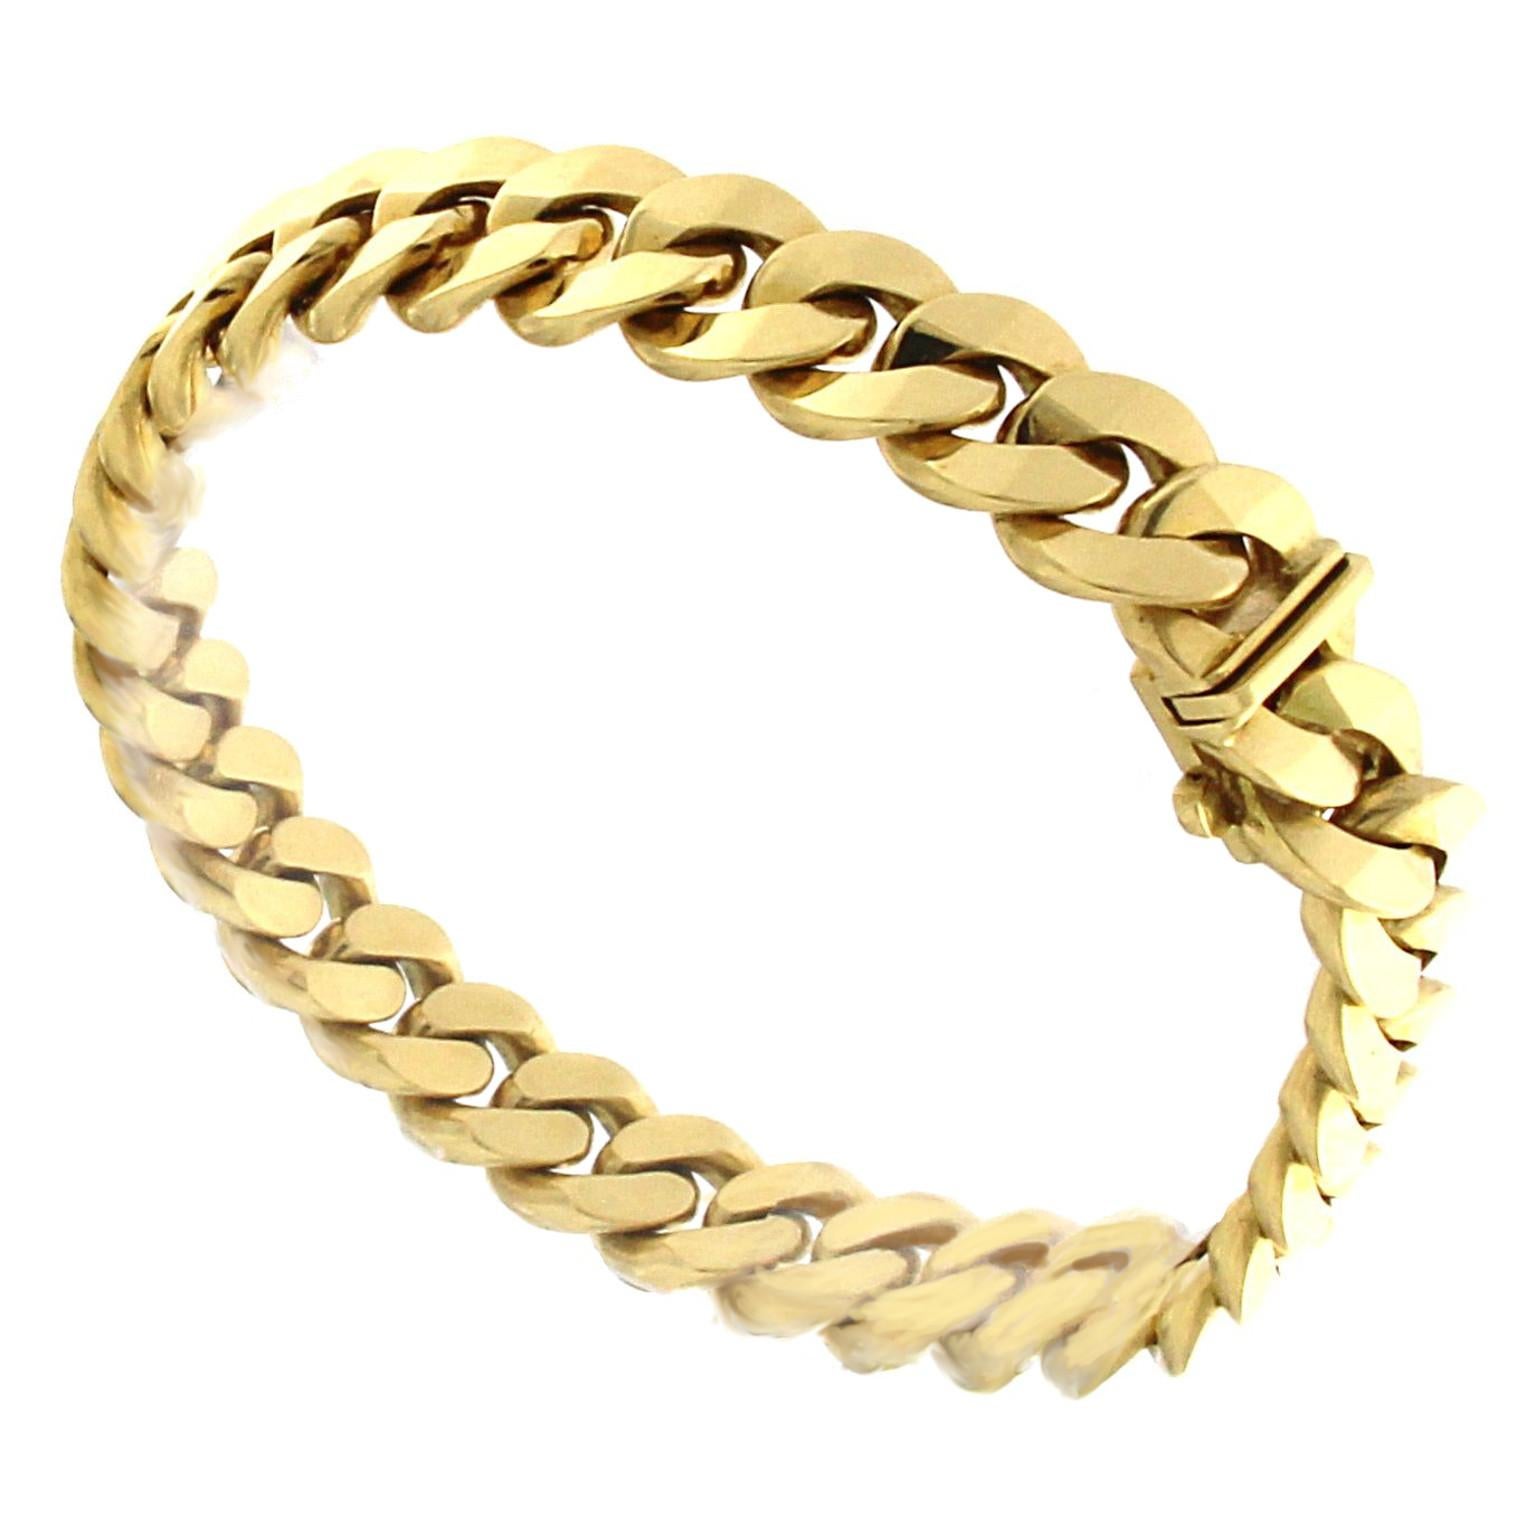 Groumette style coupled chain bracelet with great visual effect
Total weight of yellow gold 18 kt gr 70,50
Stamp 750

